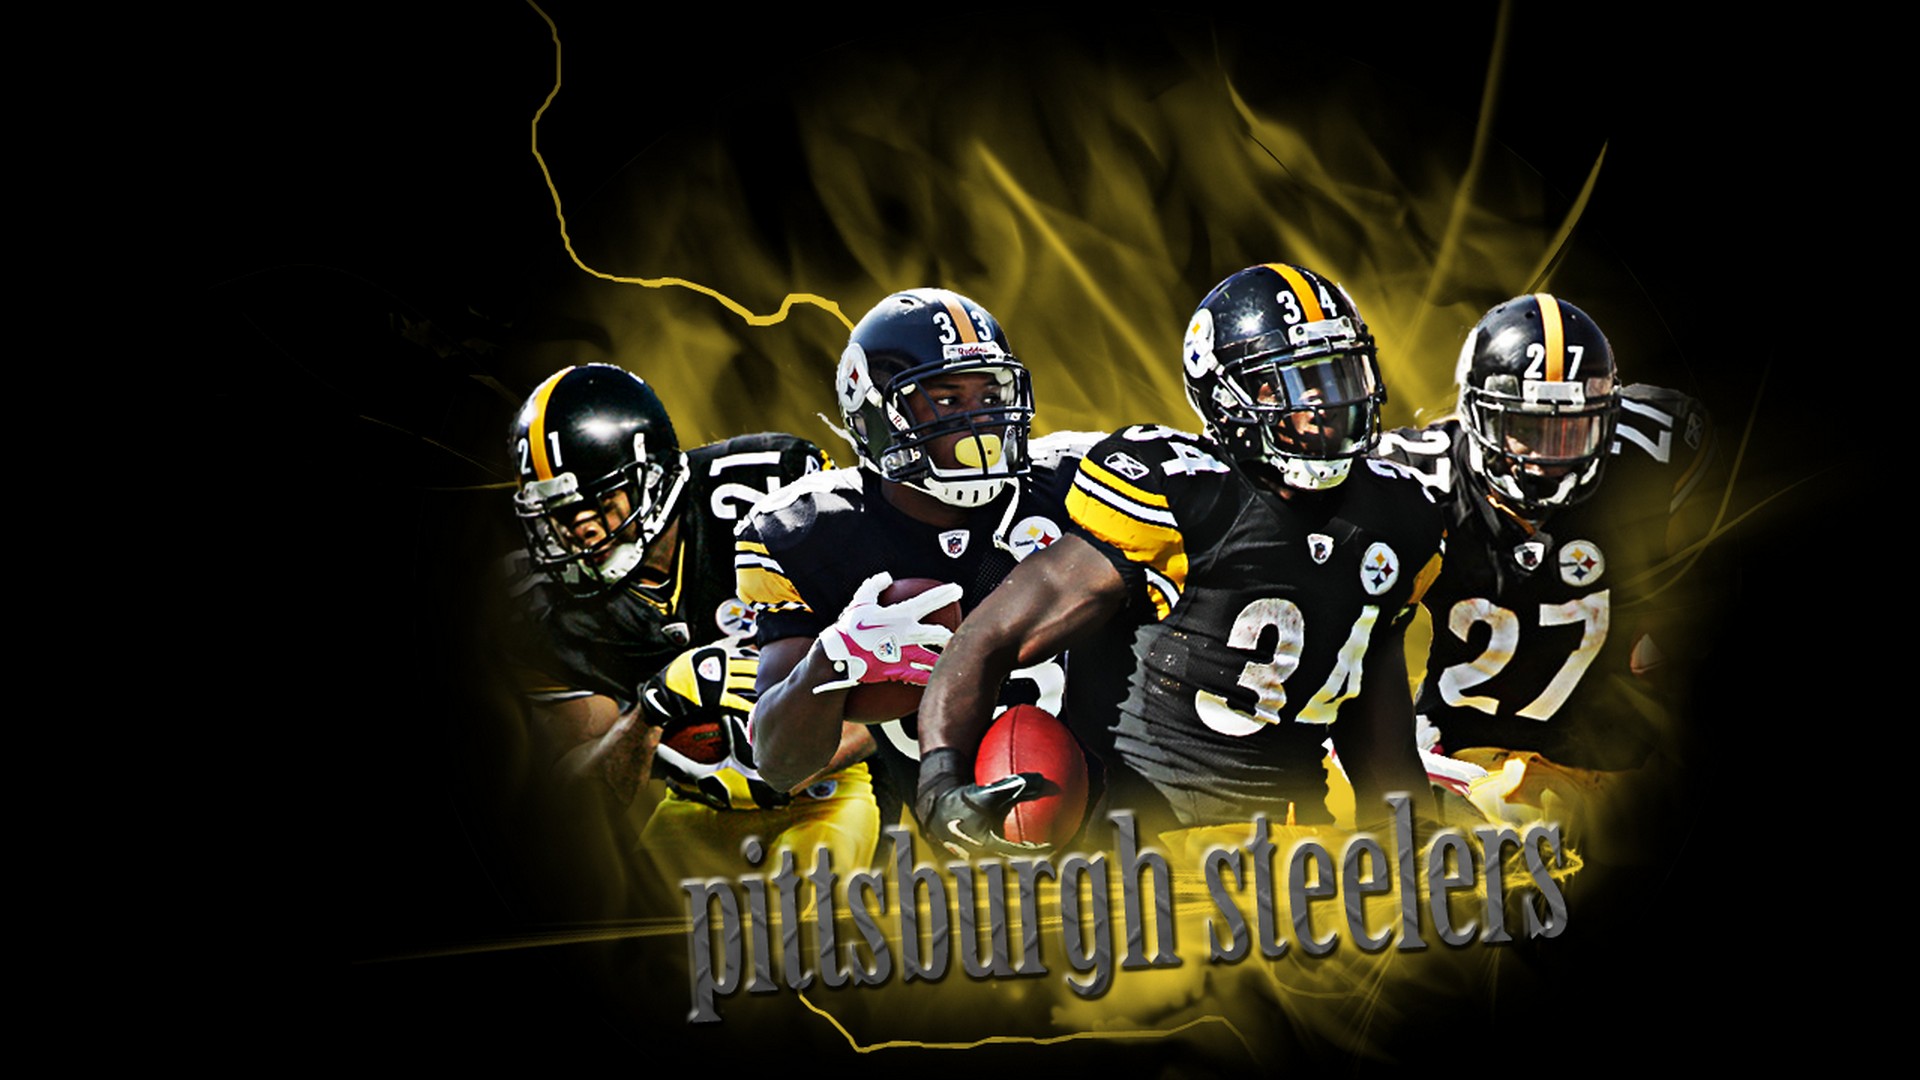 Steelers Wallpaper HD With Resolution 1920X1080 pixel. You can make this wallpaper for your Mac or Windows Desktop Background, iPhone, Android or Tablet and another Smartphone device for free